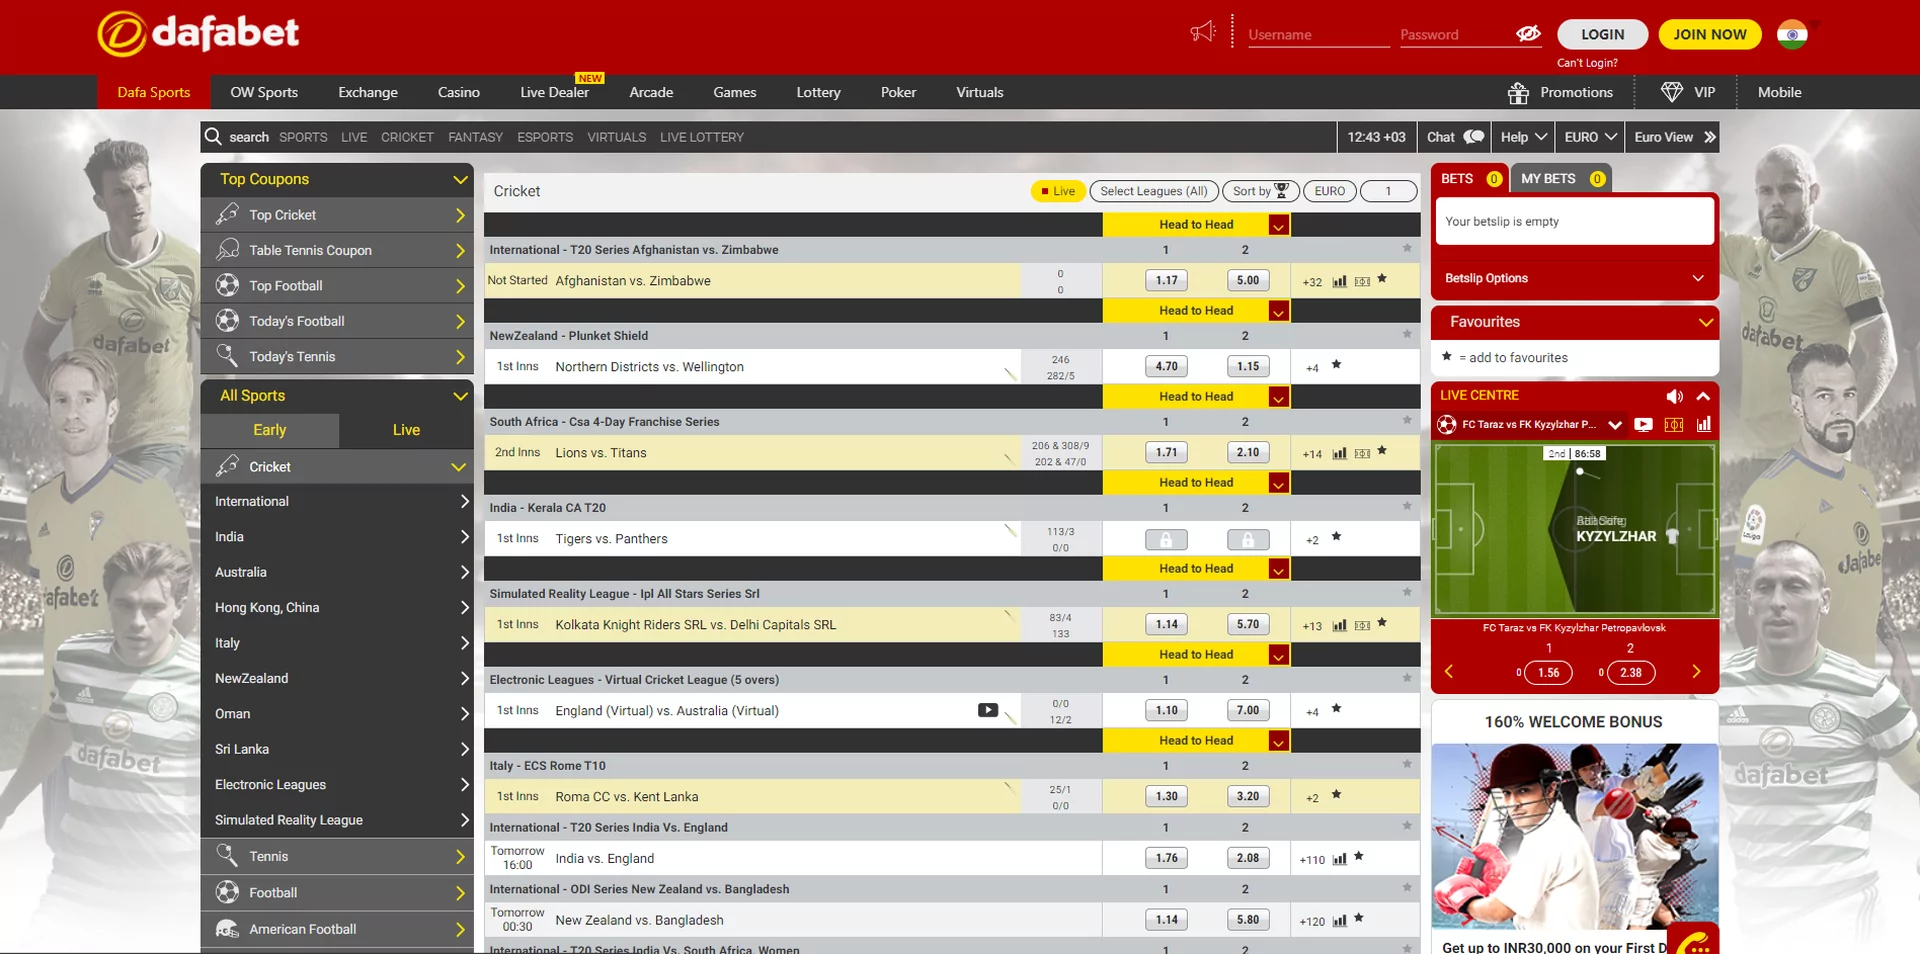 dafabet cricket betting page